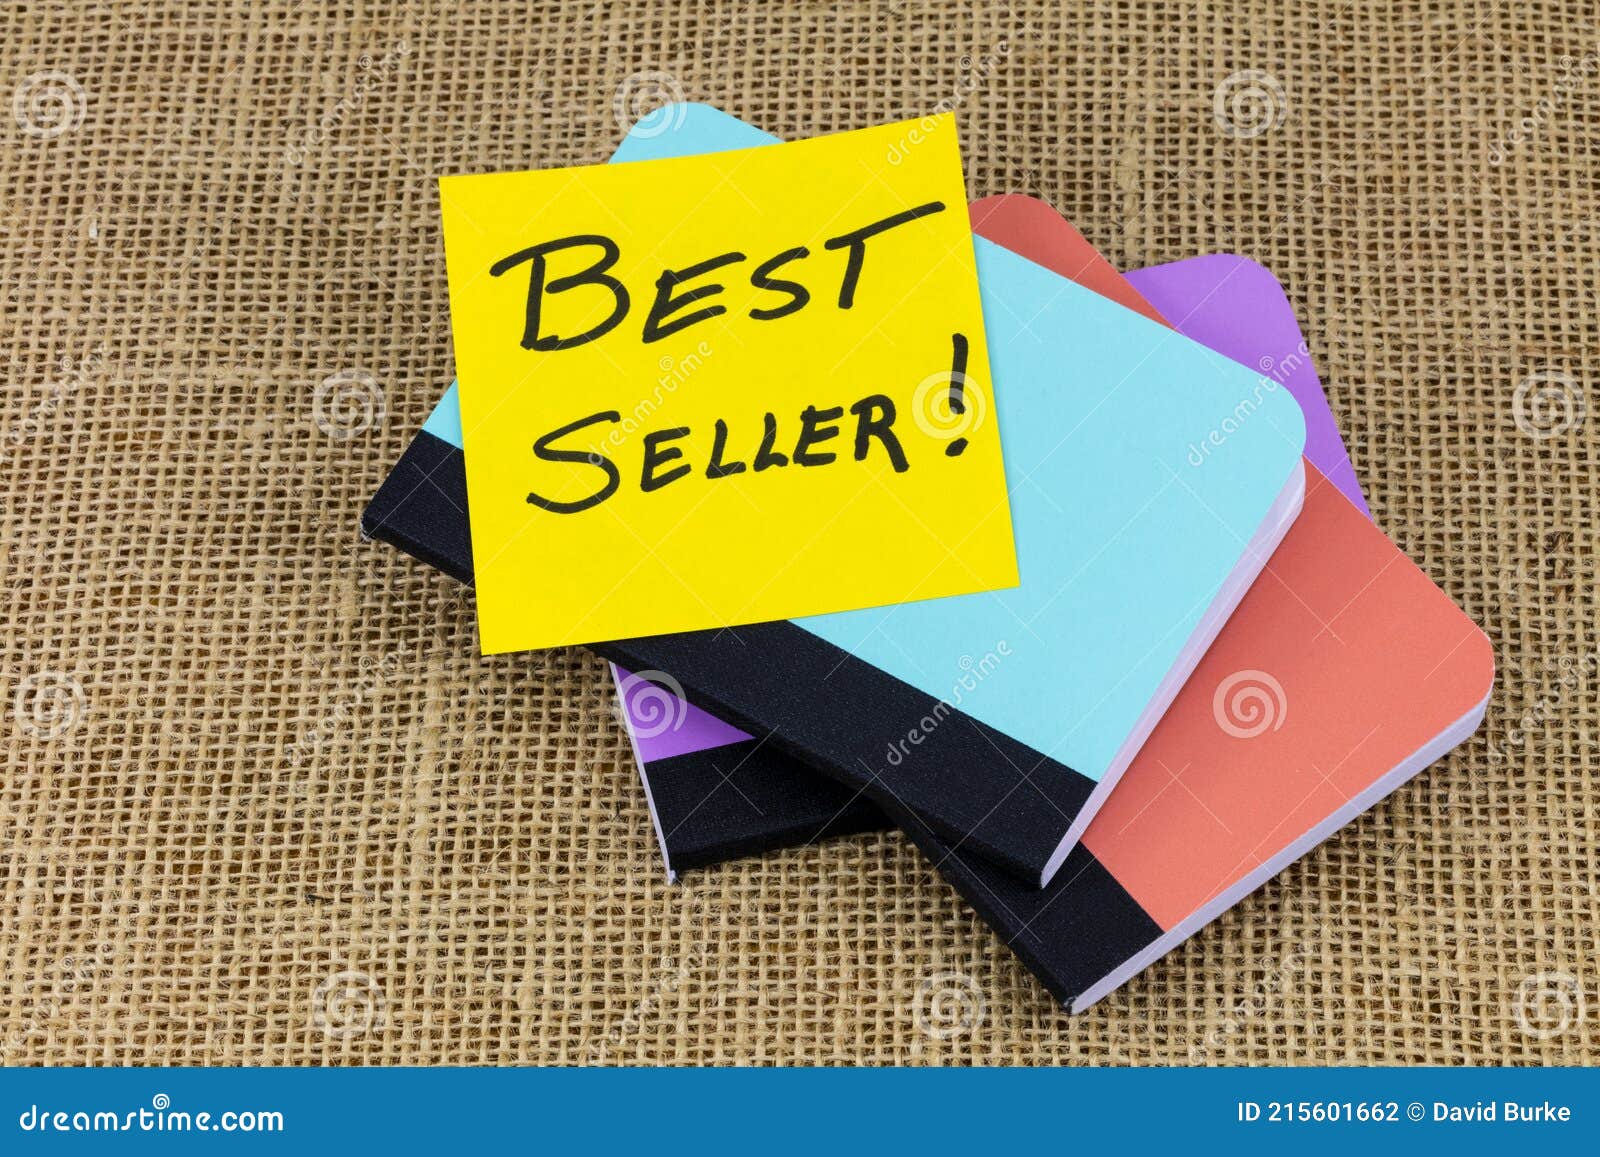 best seller product promotion quality award book literature bookstore